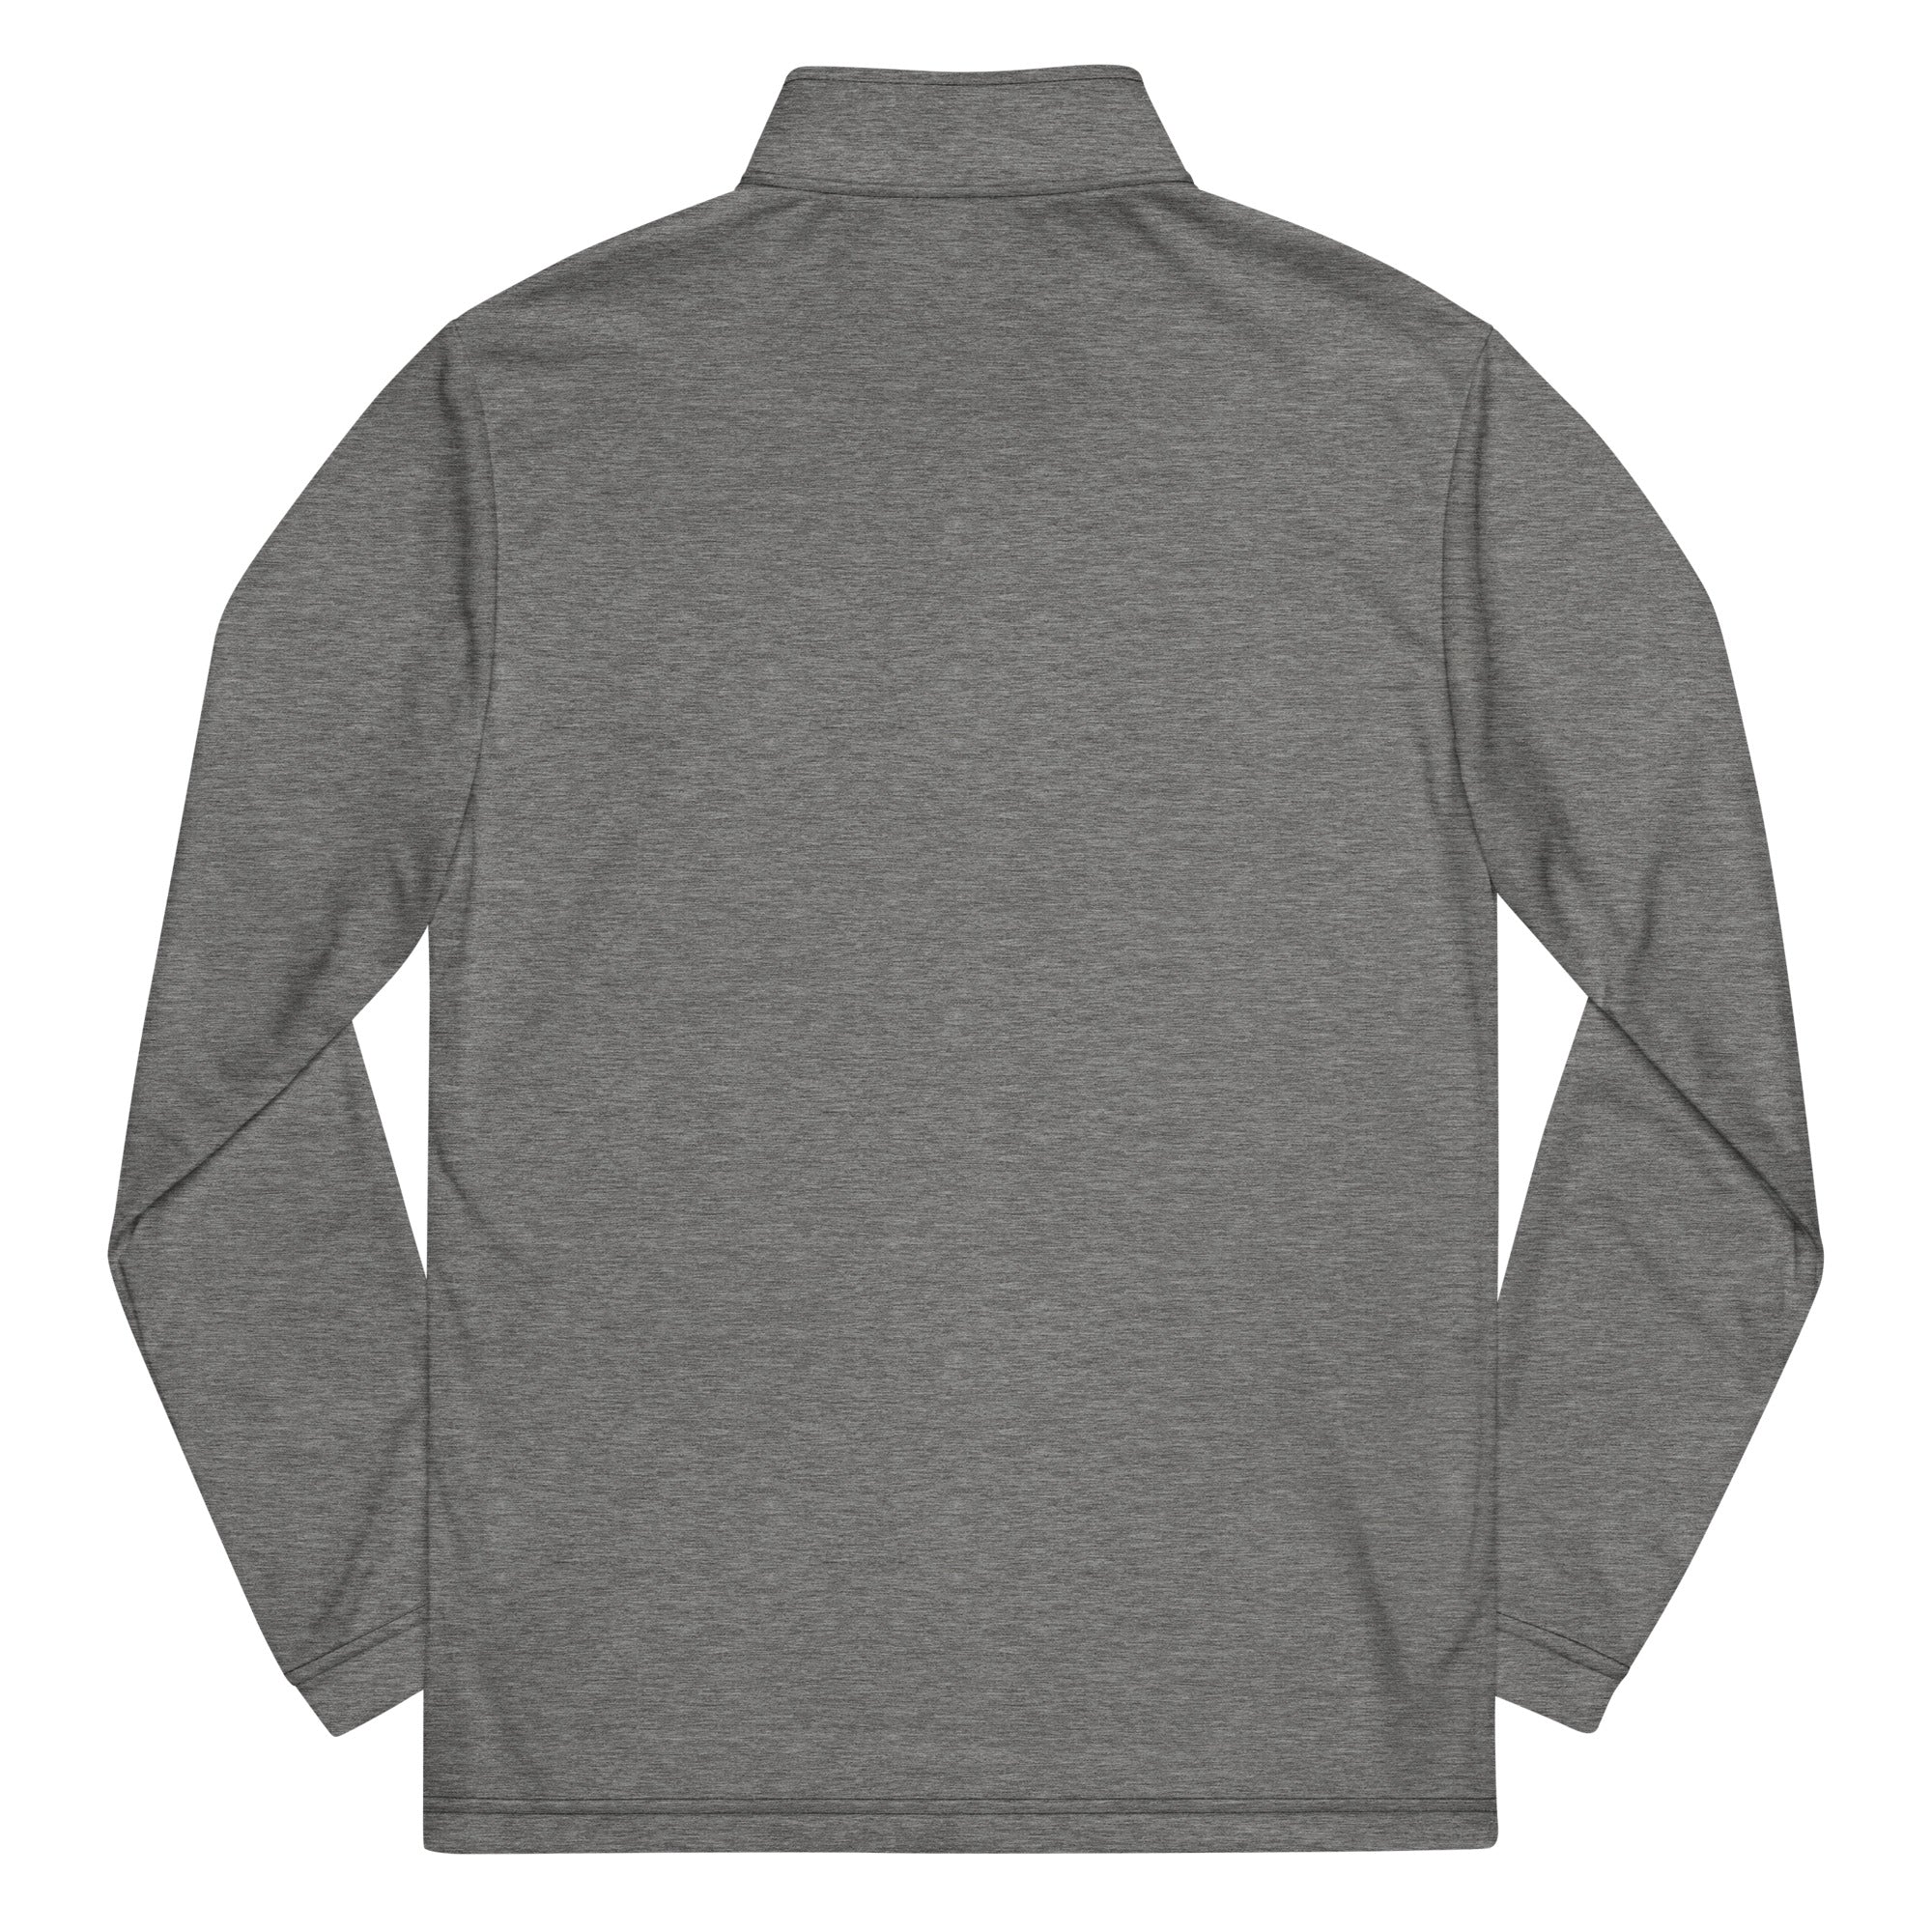 "Life's Better When You're Swimming" Quarter zip pullover